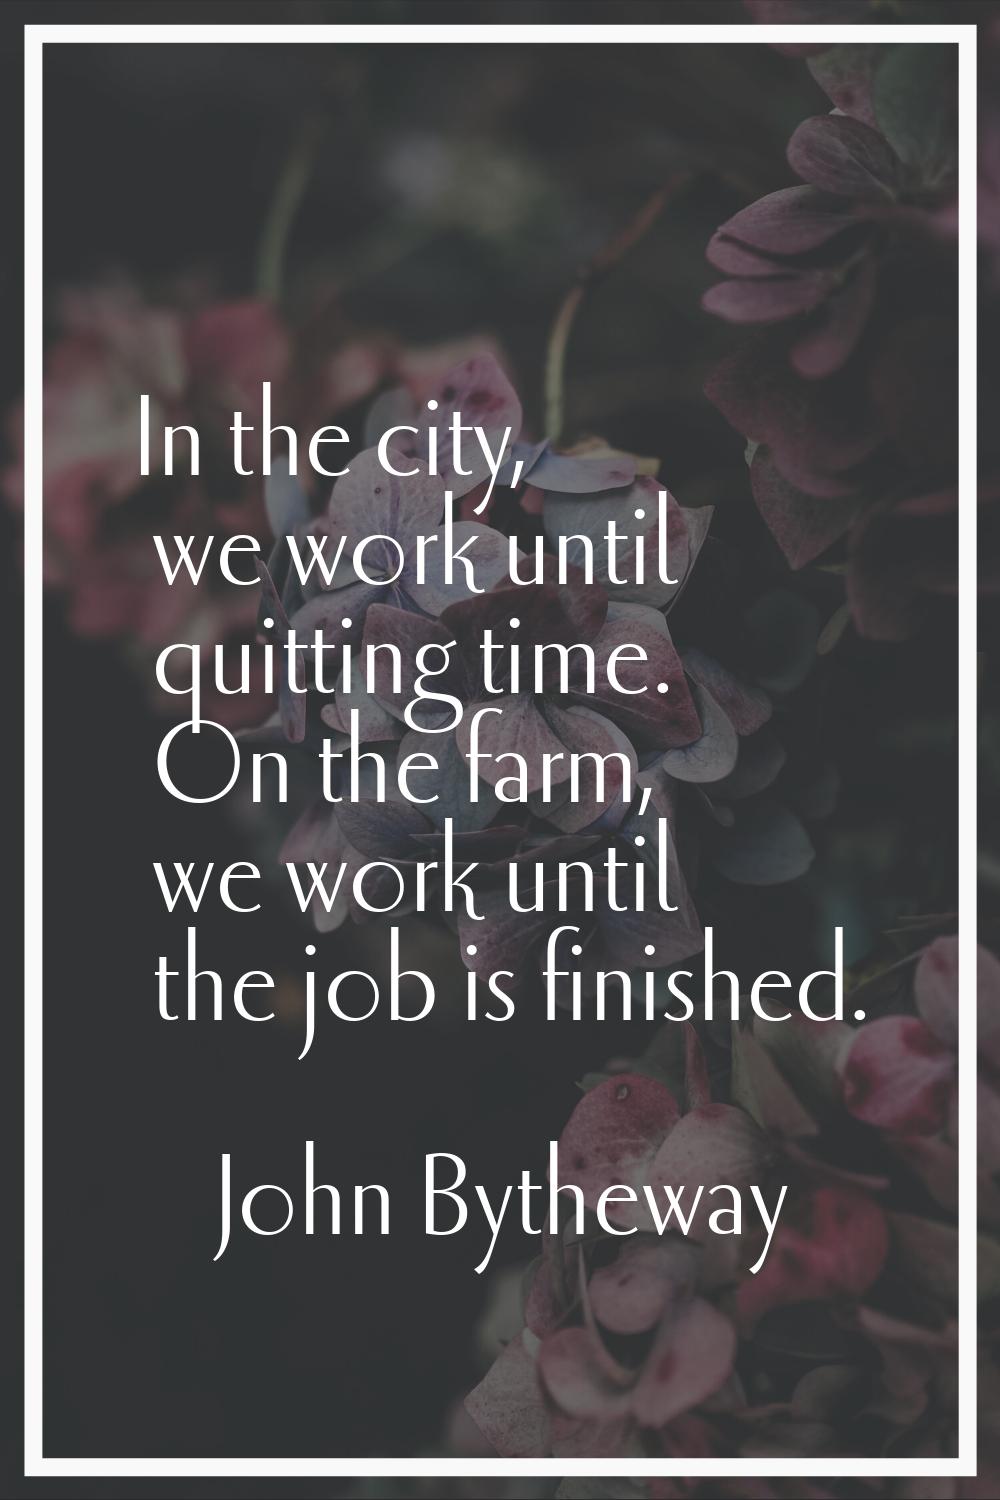 In the city, we work until quitting time. On the farm, we work until the job is finished.